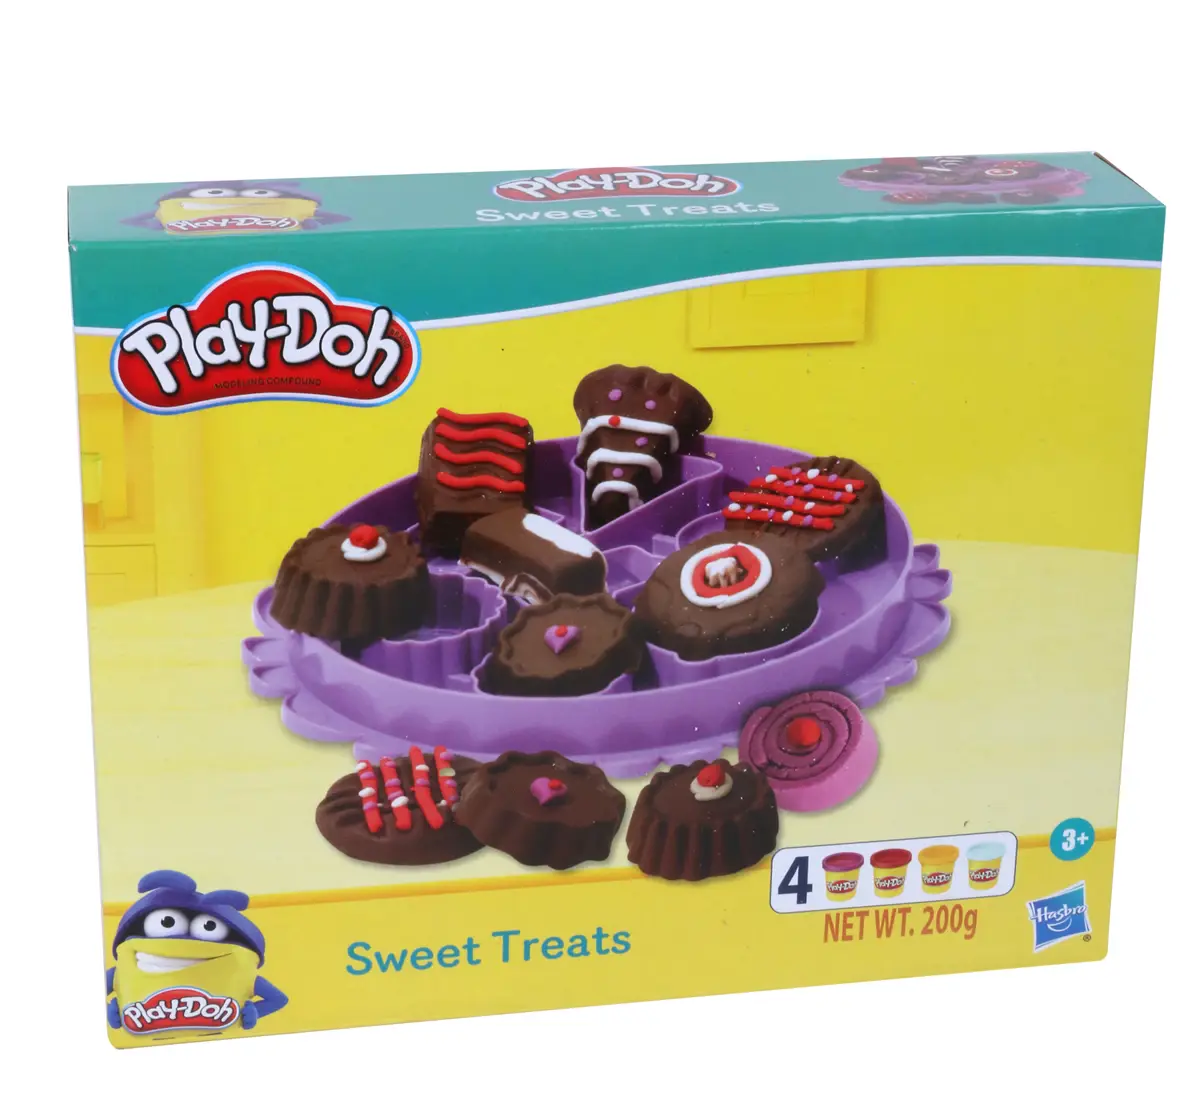 Play Doh Sweet Treats Playset for Kids 3Y+, Multicolour